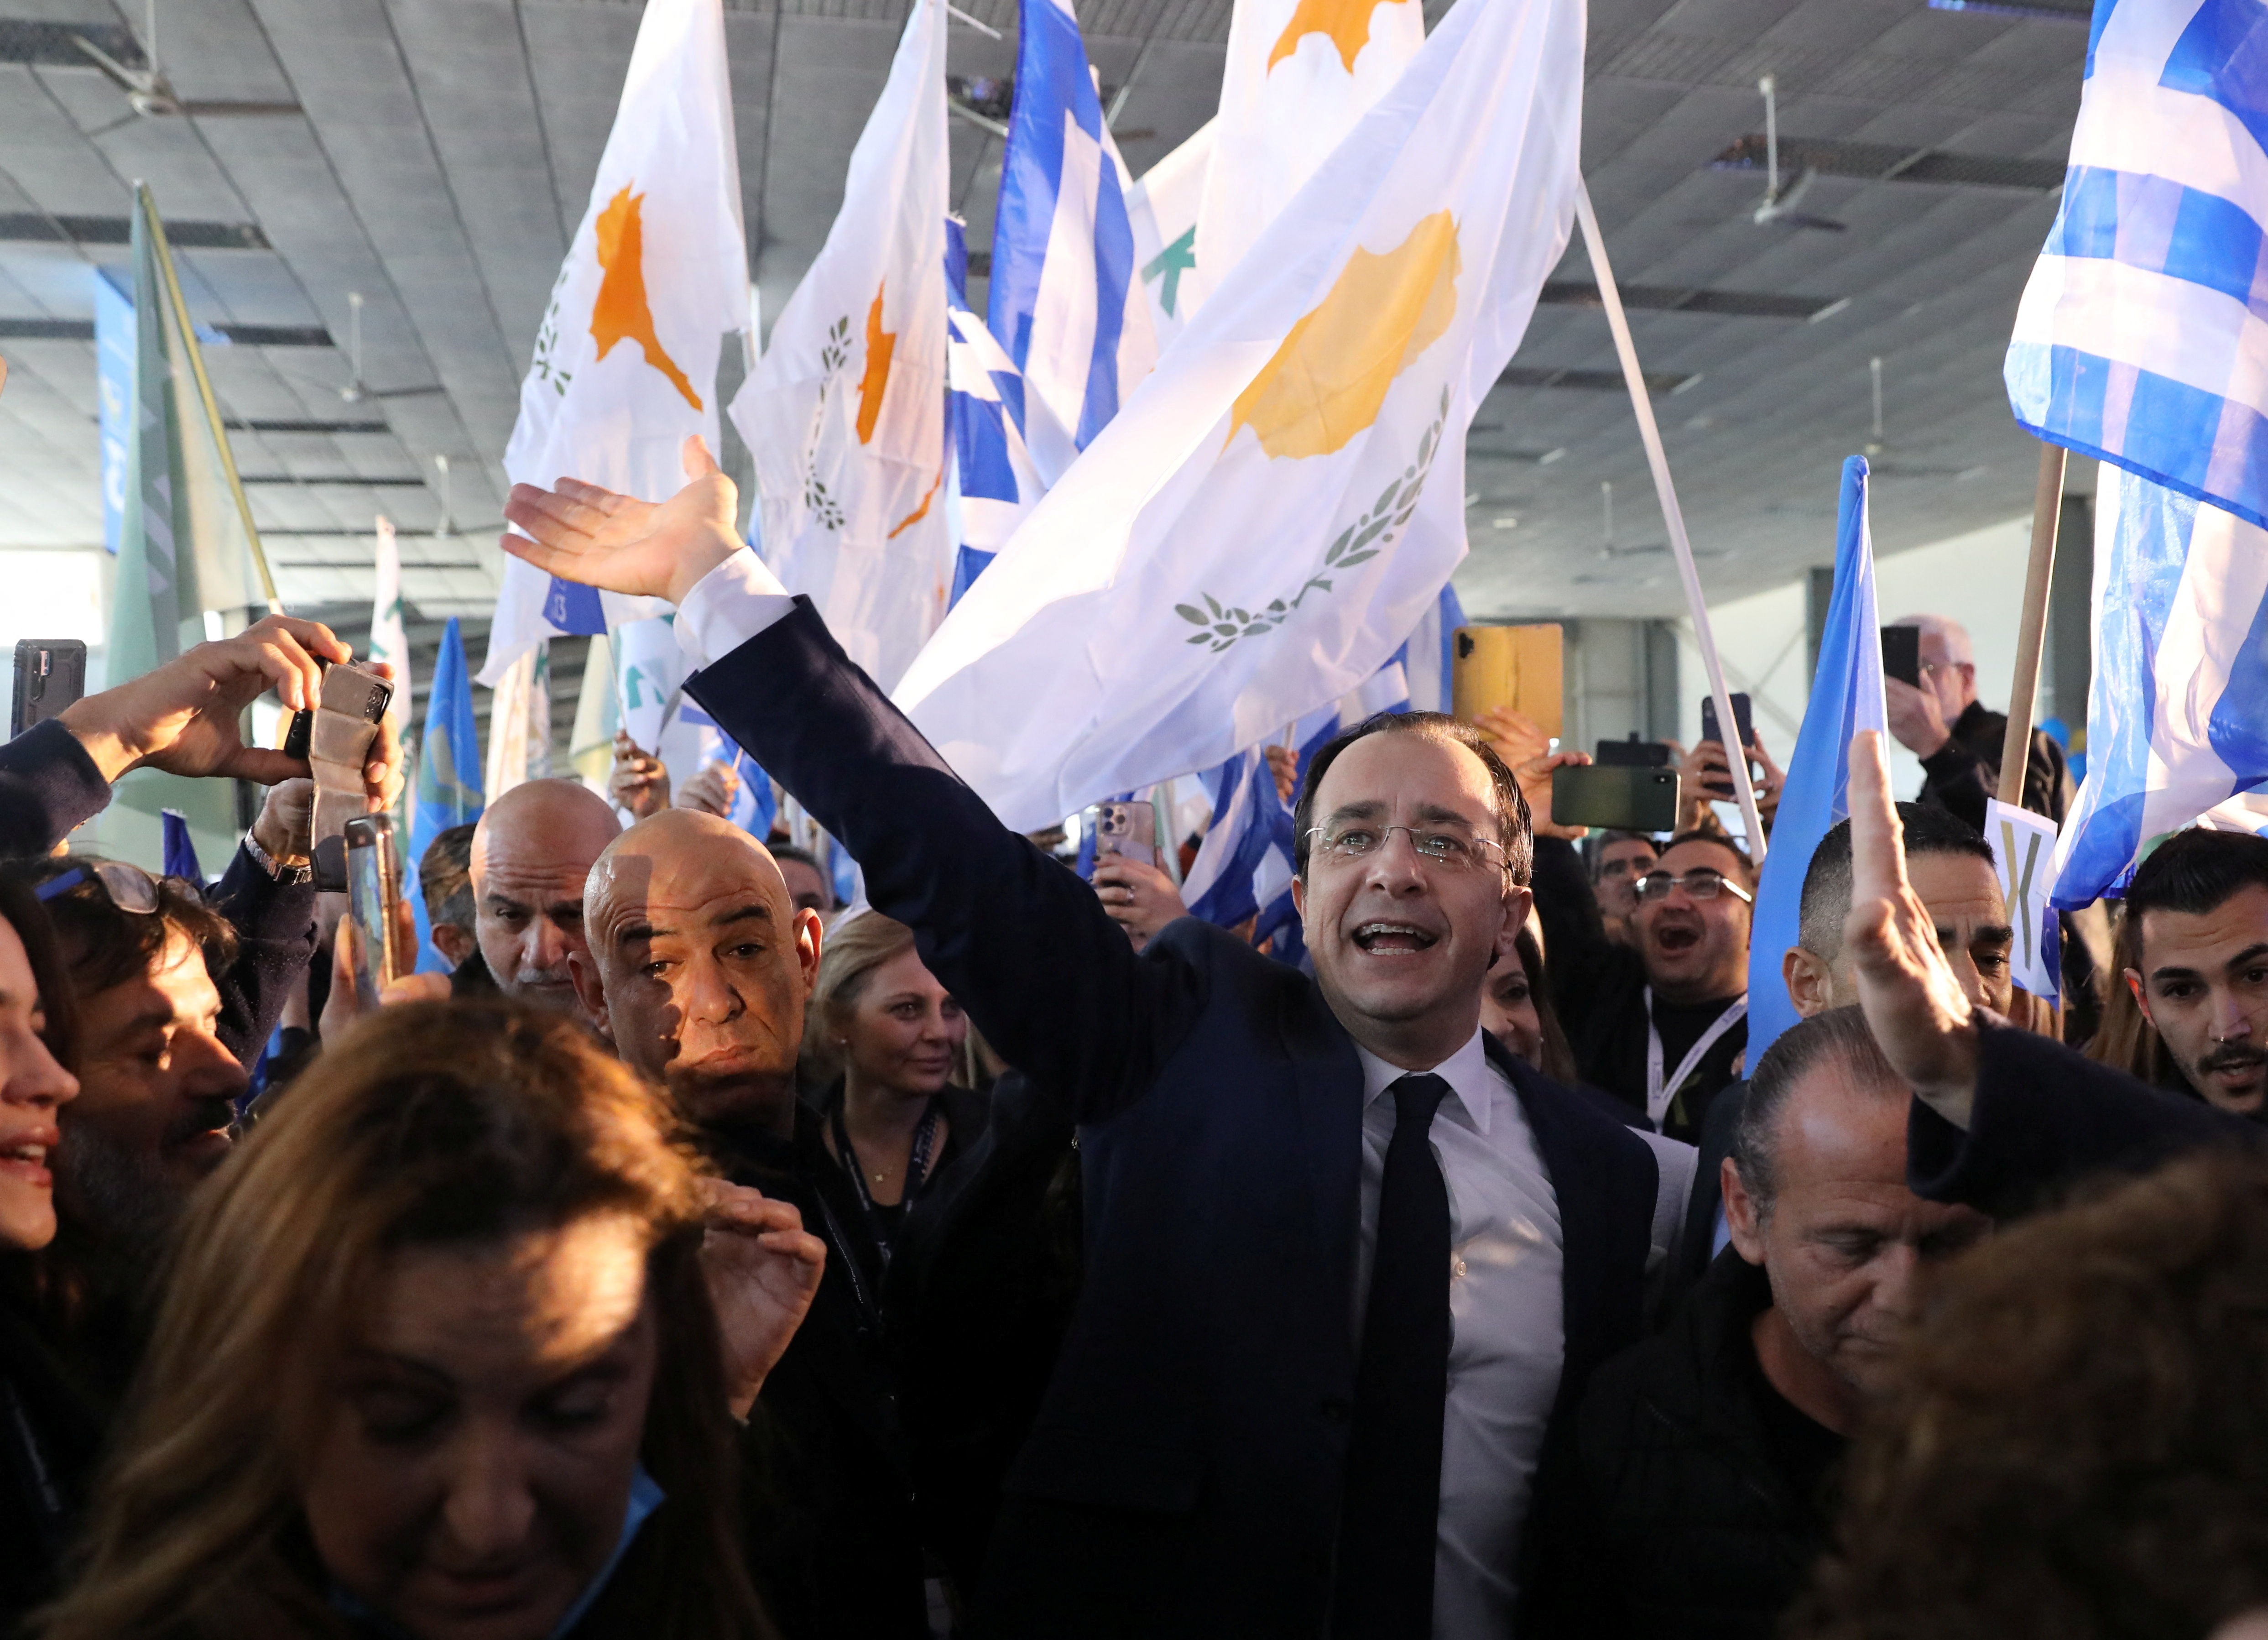 image Christodoulides’ team remains tight lipped over €200,000 donation